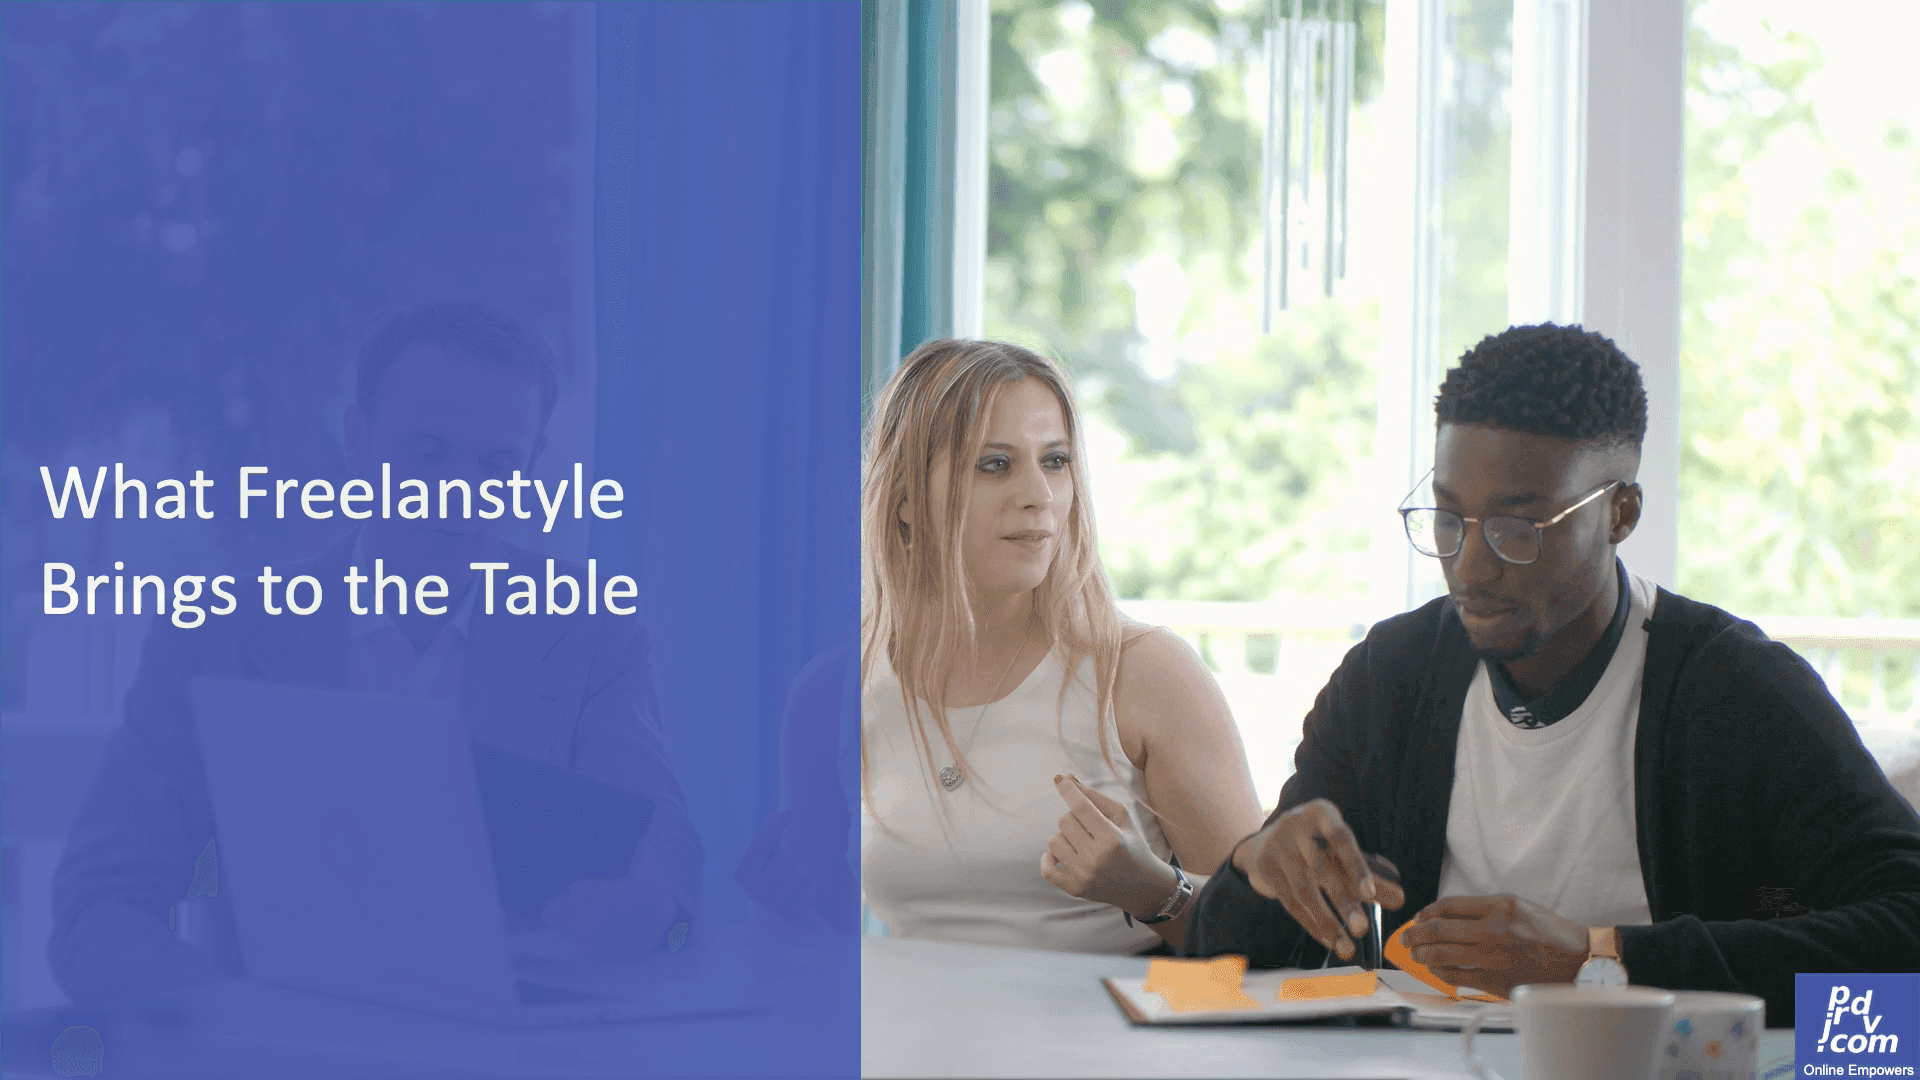 What Freelanstyle Brings to the Table